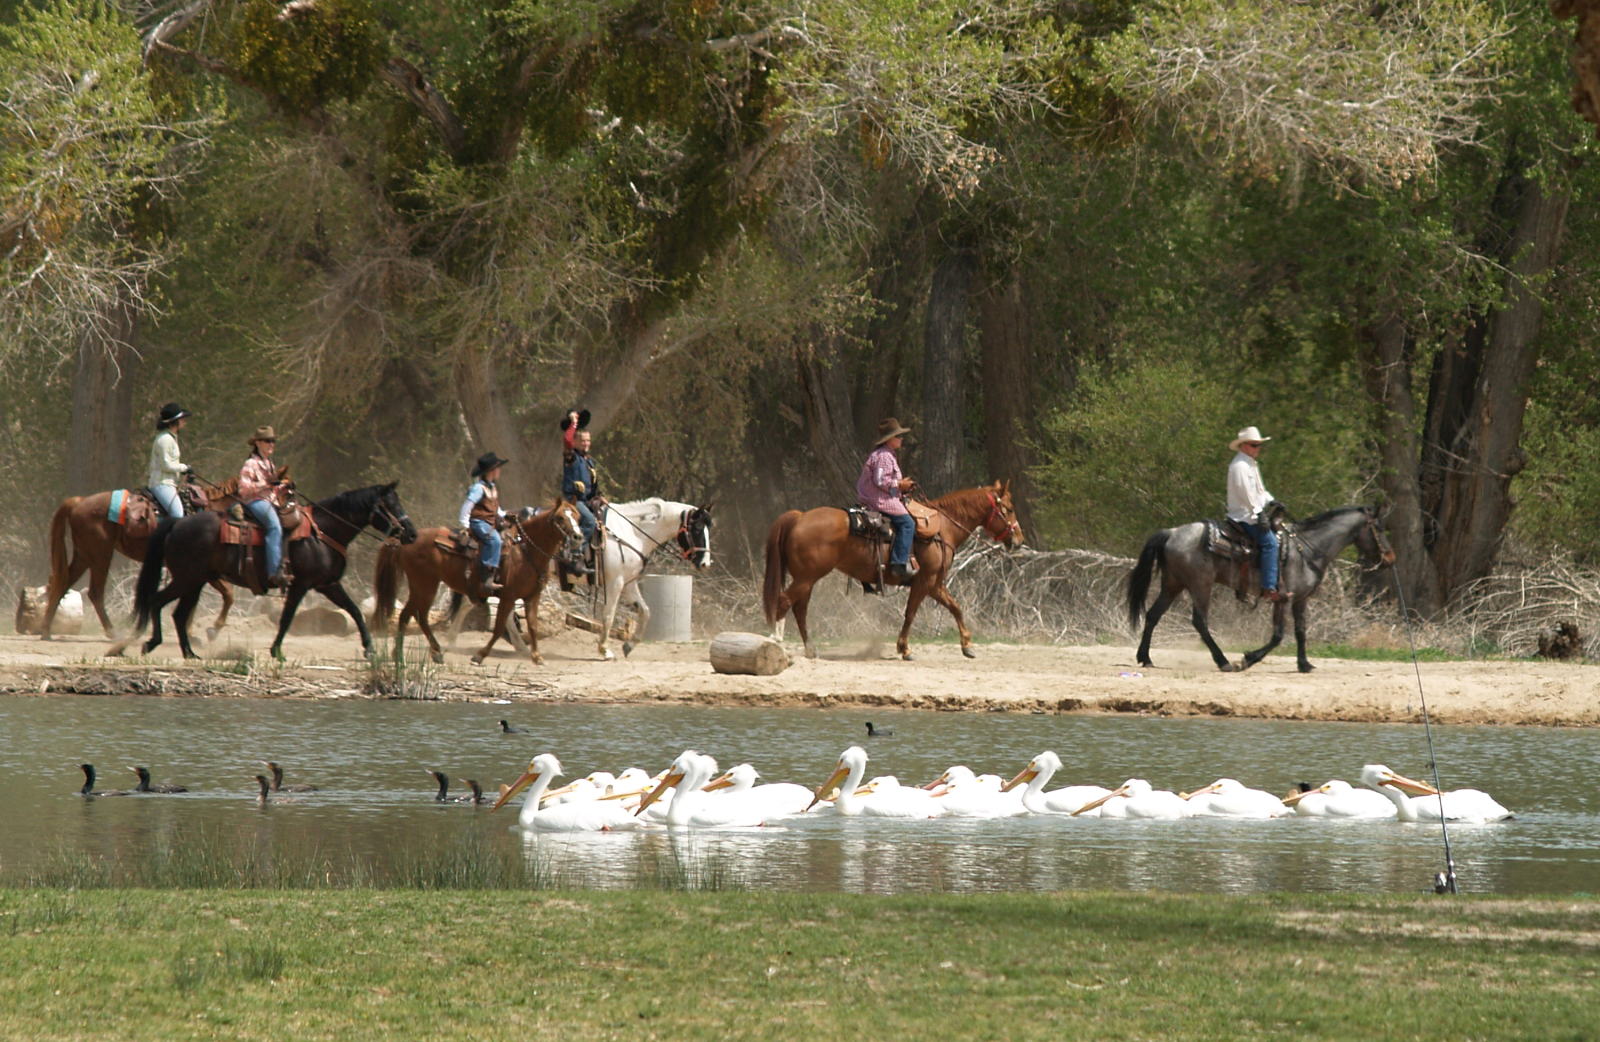 Riders are seen on horseback along the lake with ducks.